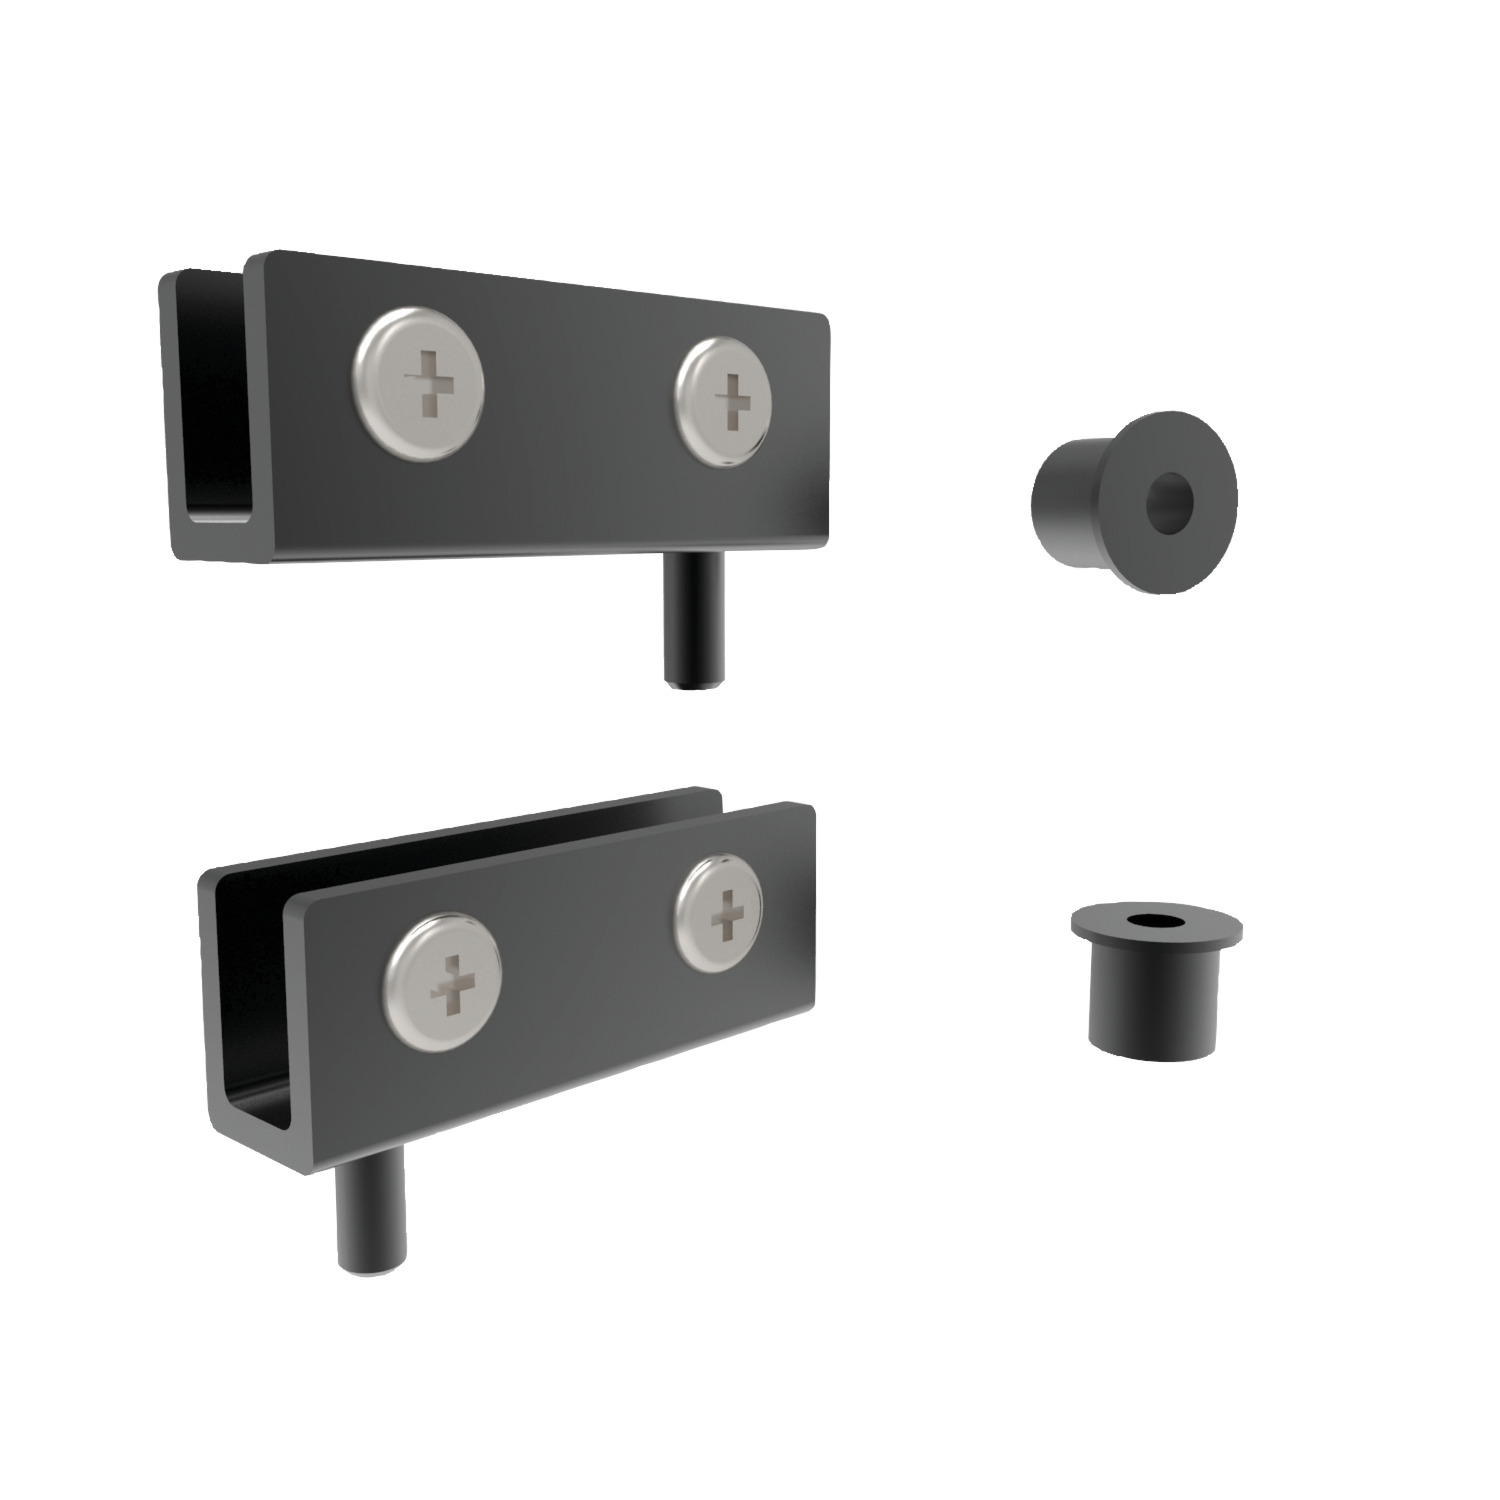 T2400.AW0020 Glass Door Hinge - Inset Type (L) Steel - Glass thickness 4,5 mm. Load capacity 2 hinges 4kg